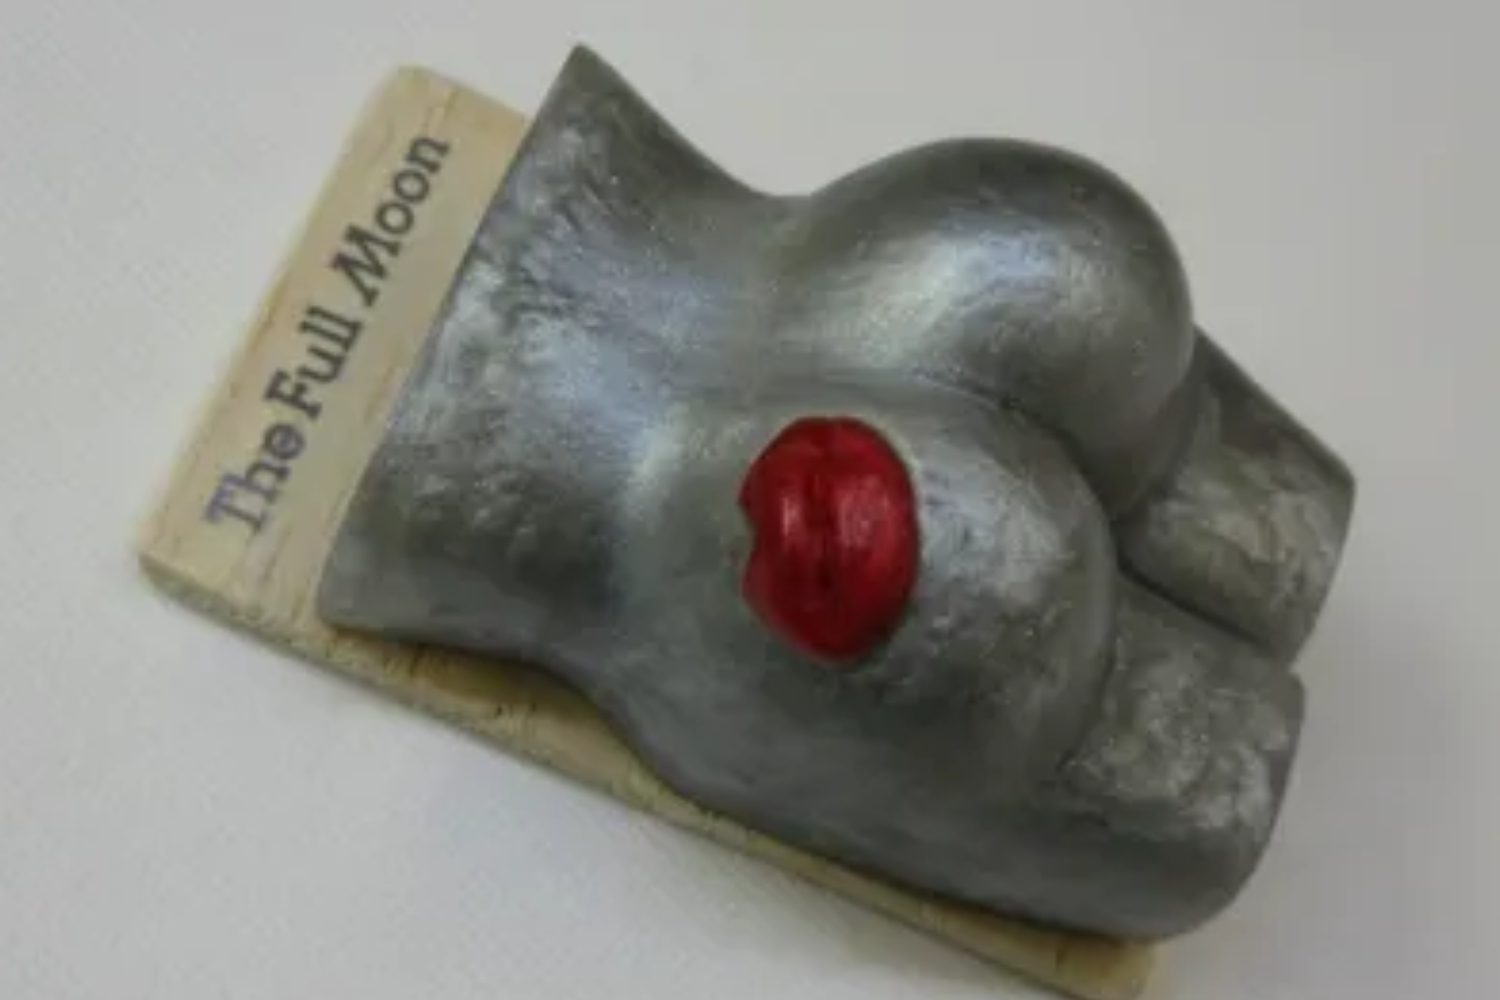 A metal object with red nose and nipple.